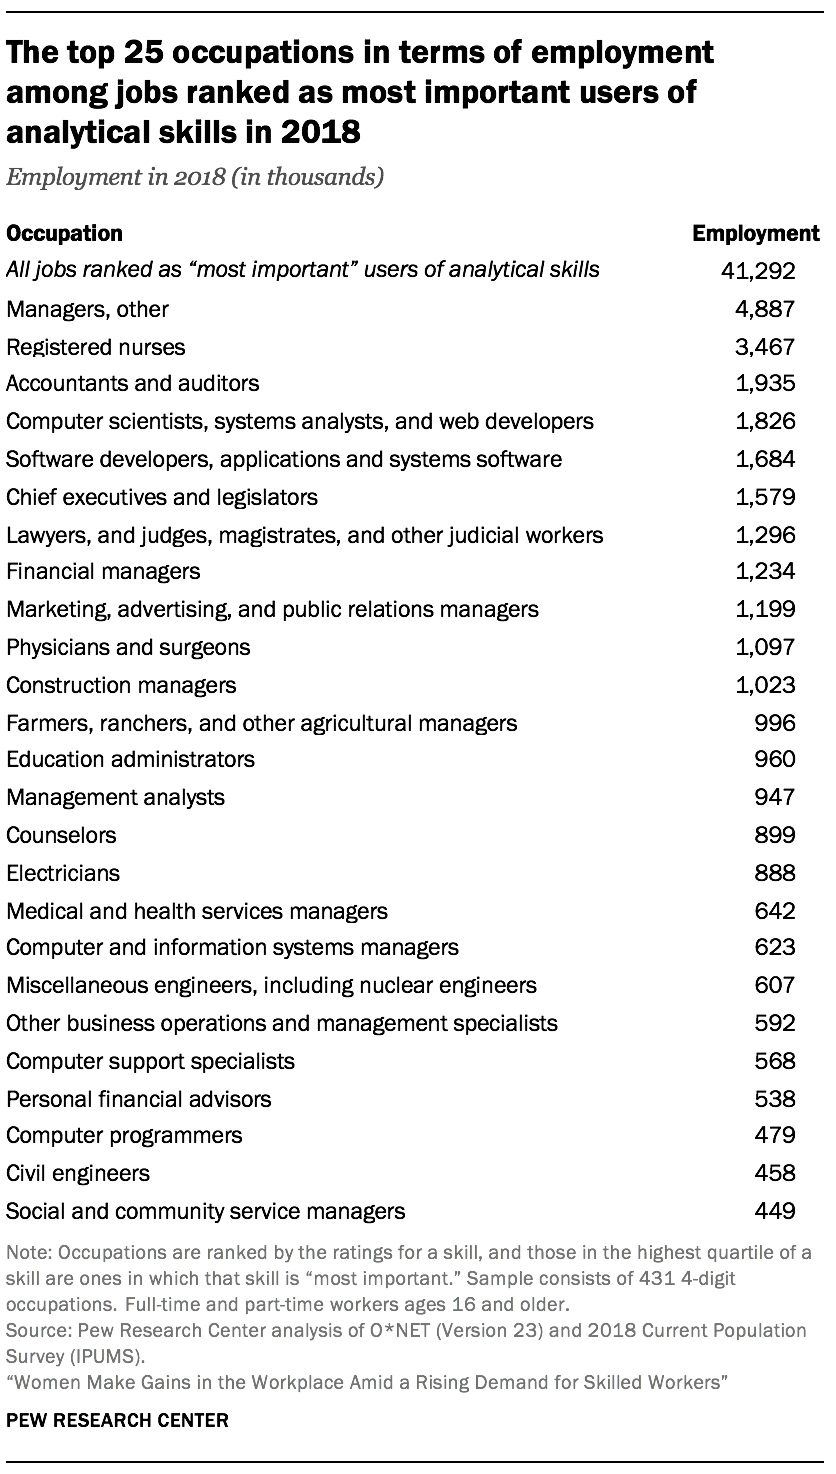 The top 25 occupations in terms of employment among jobs ranked as most important users of analytical skills in 2018